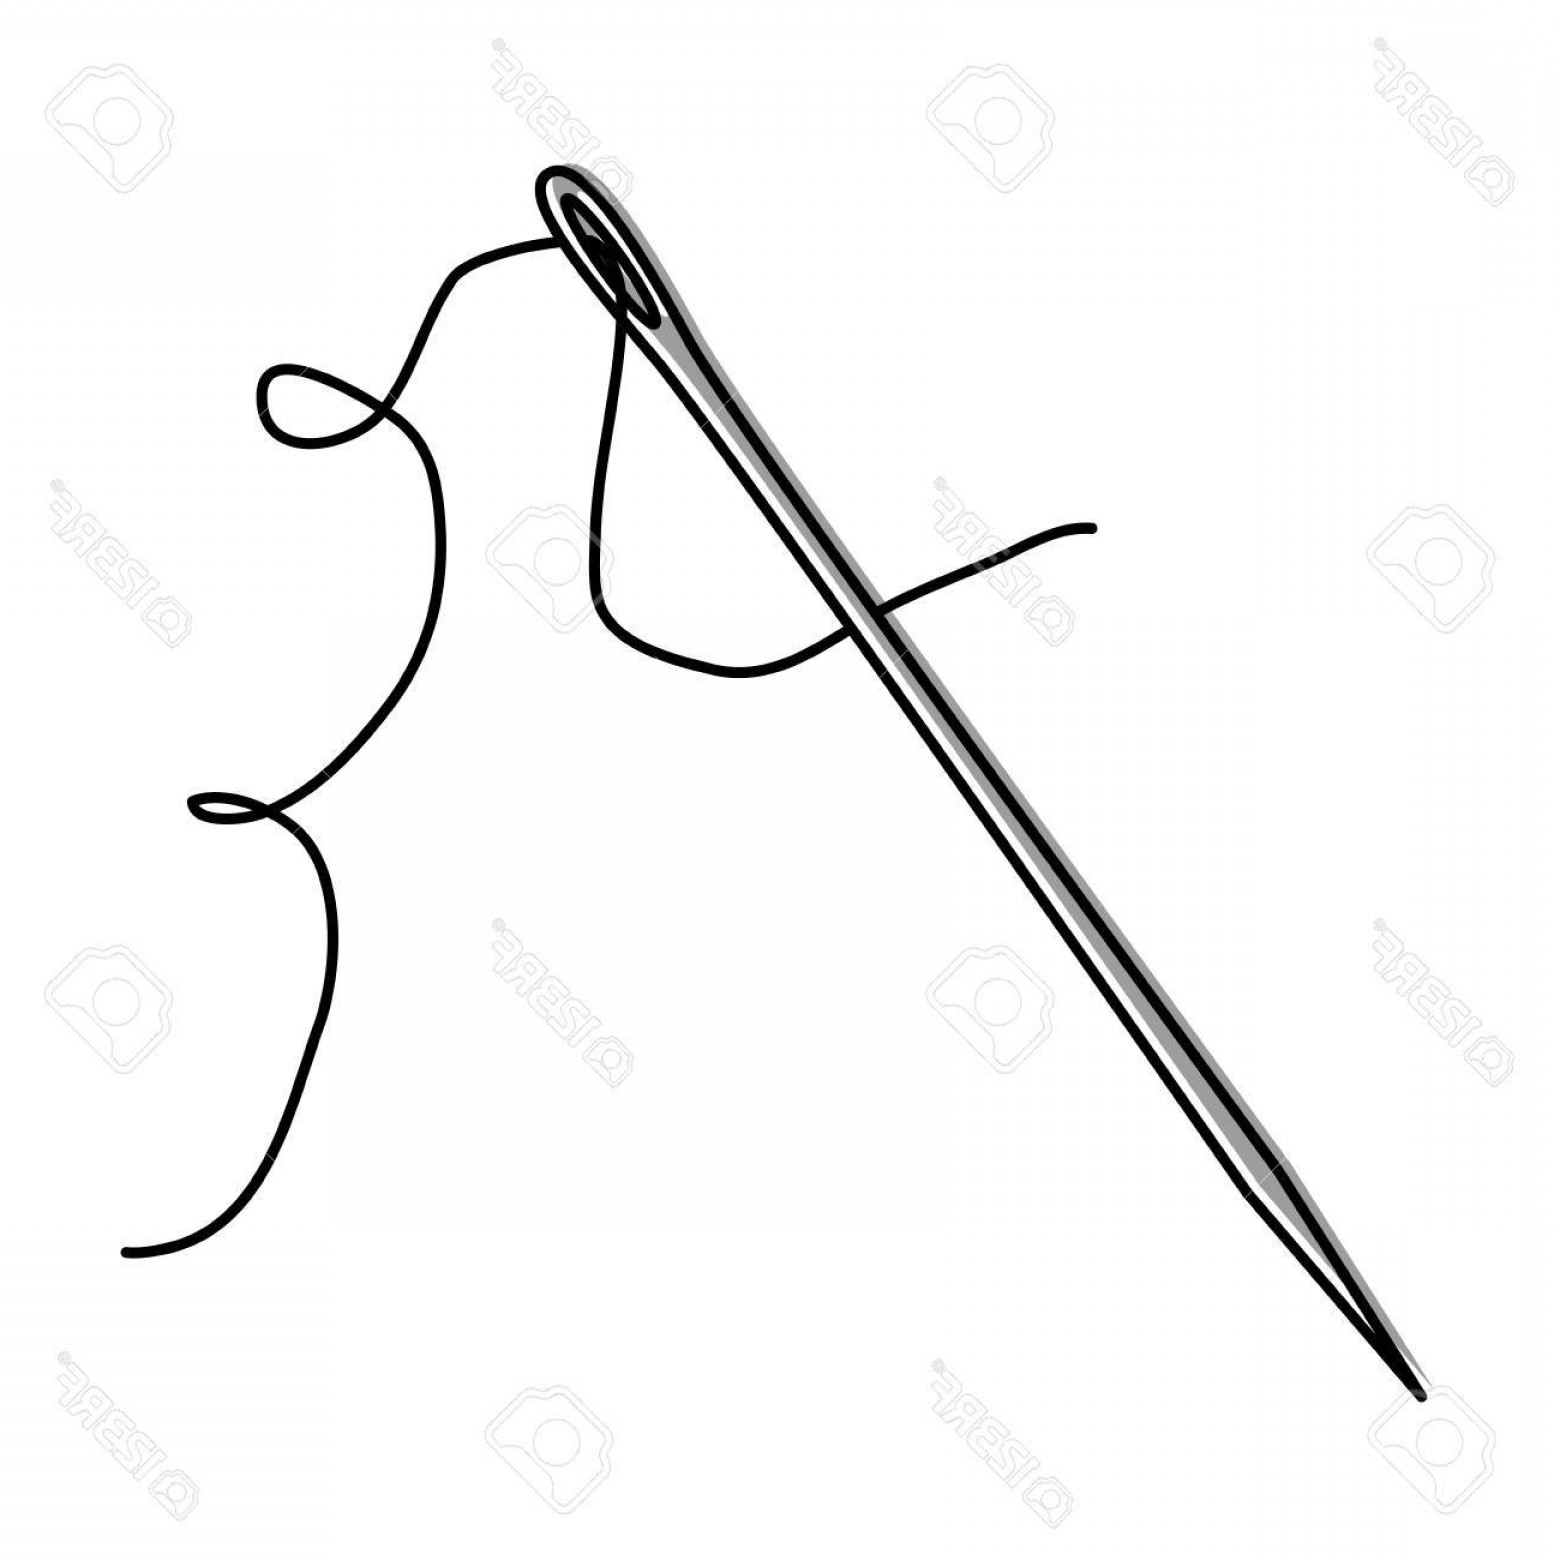 sewing needle clipart vector